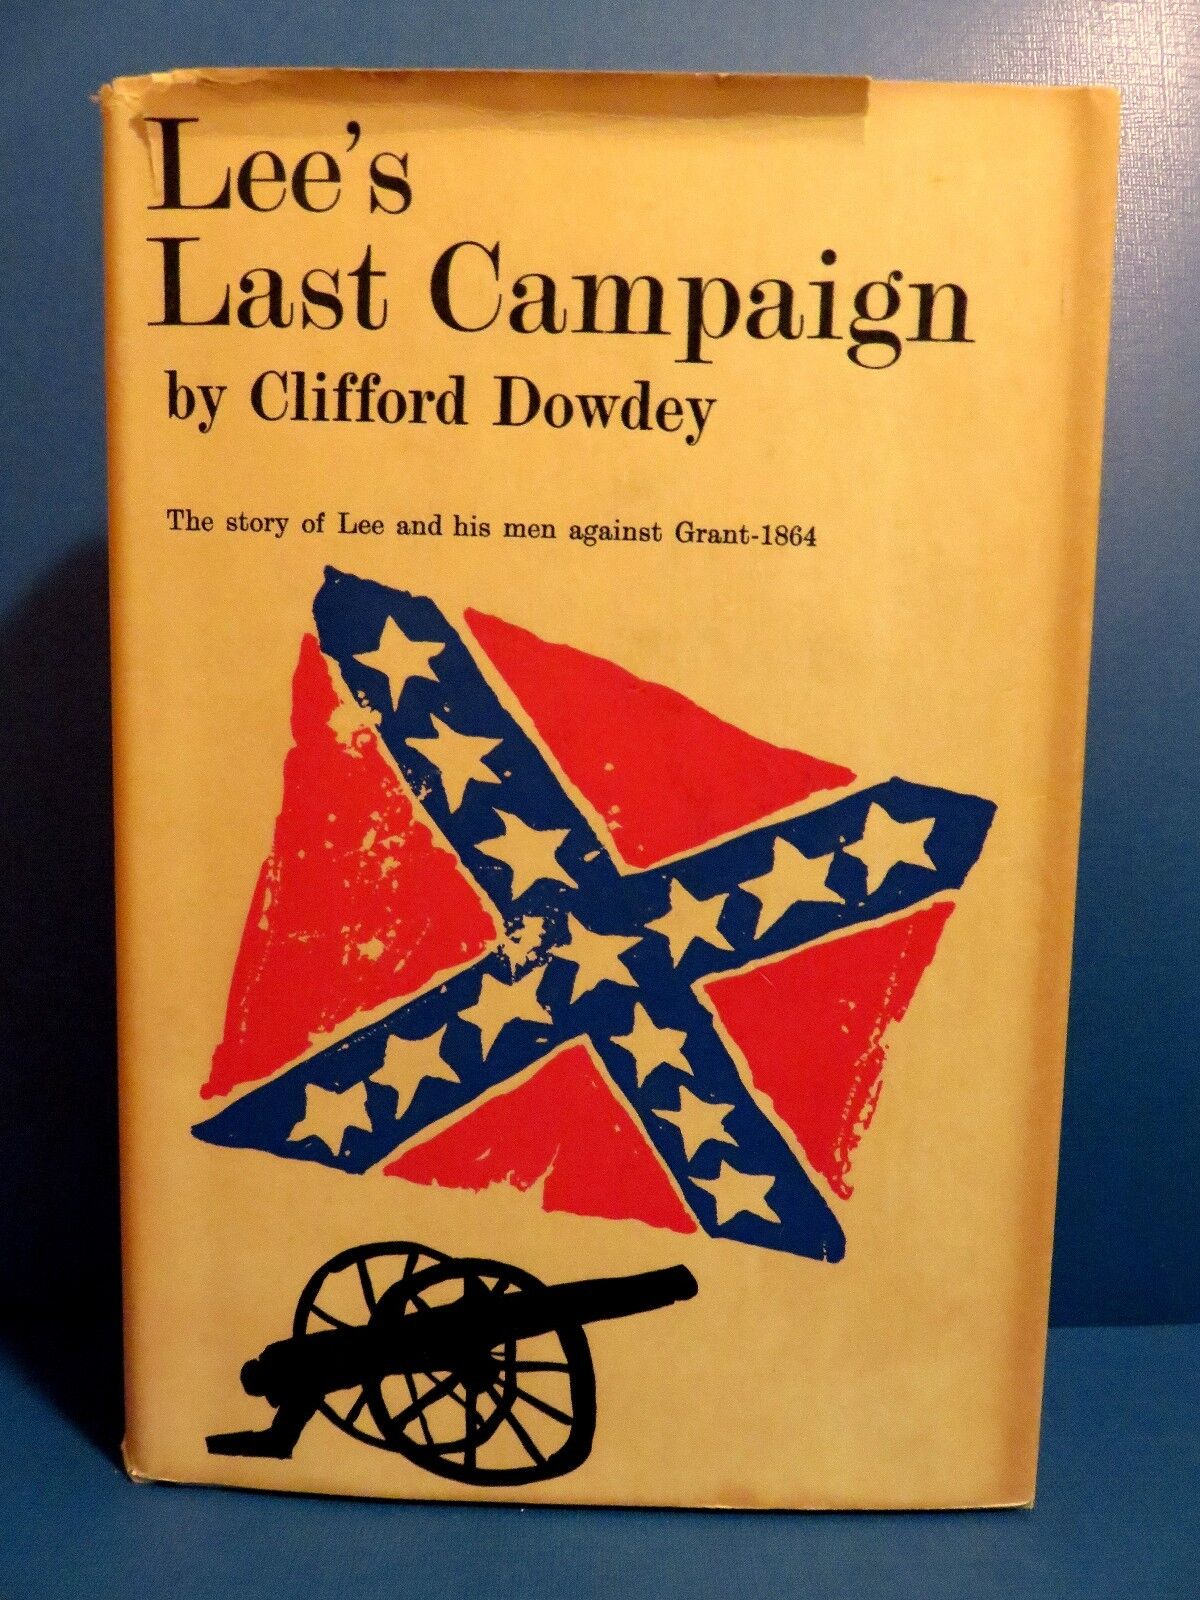 Lee\'s Last Campaign: Lee & His Men Against Grant-1864 by Clifford Dowdey. 1st Ed